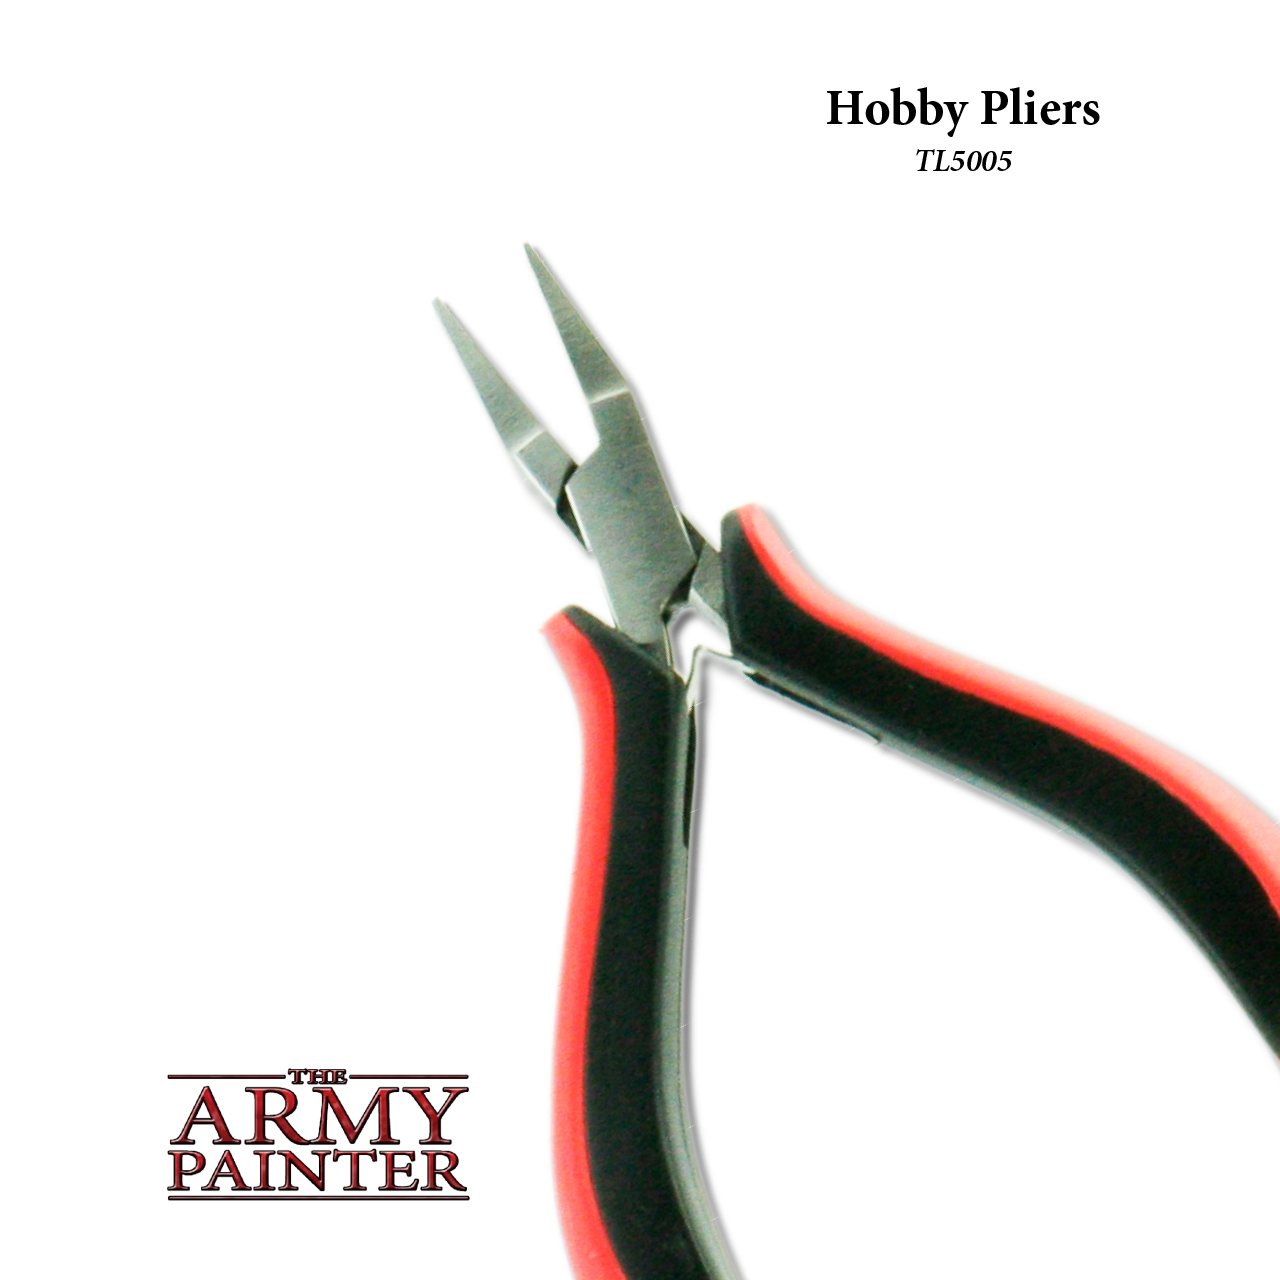 ARMY PAINTER: WARGAMING & MODEL PLIERS